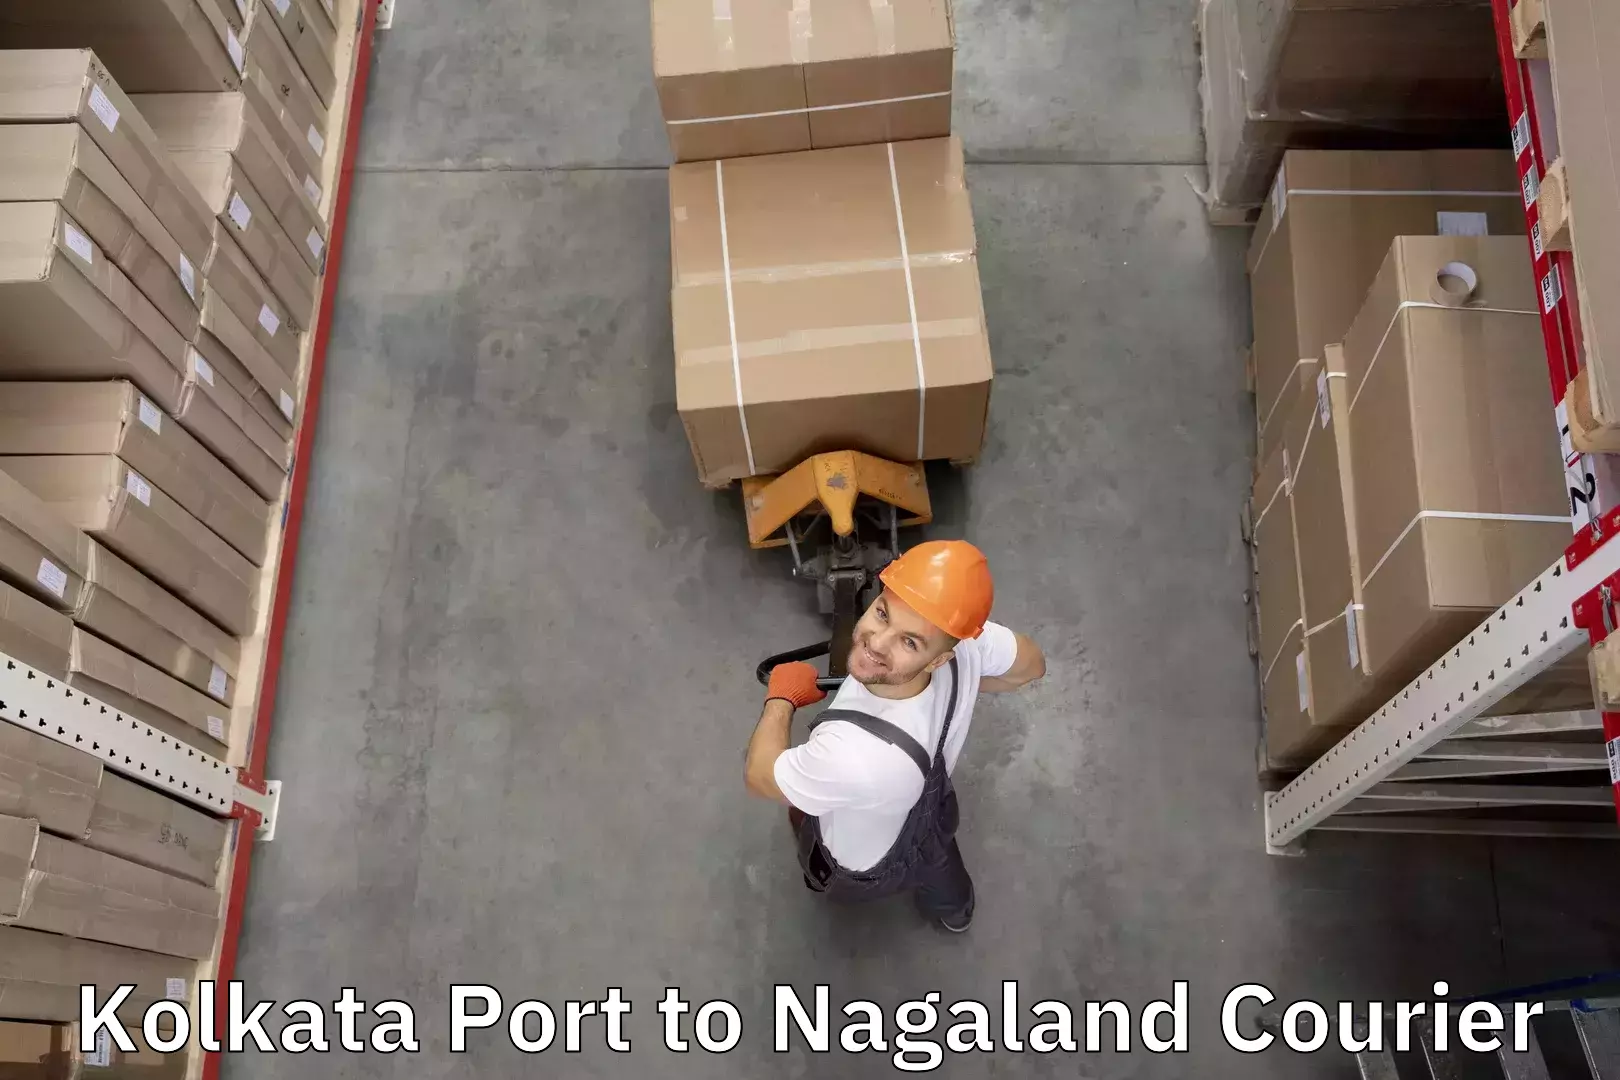 Customized luggage delivery in Kolkata Port to Nagaland